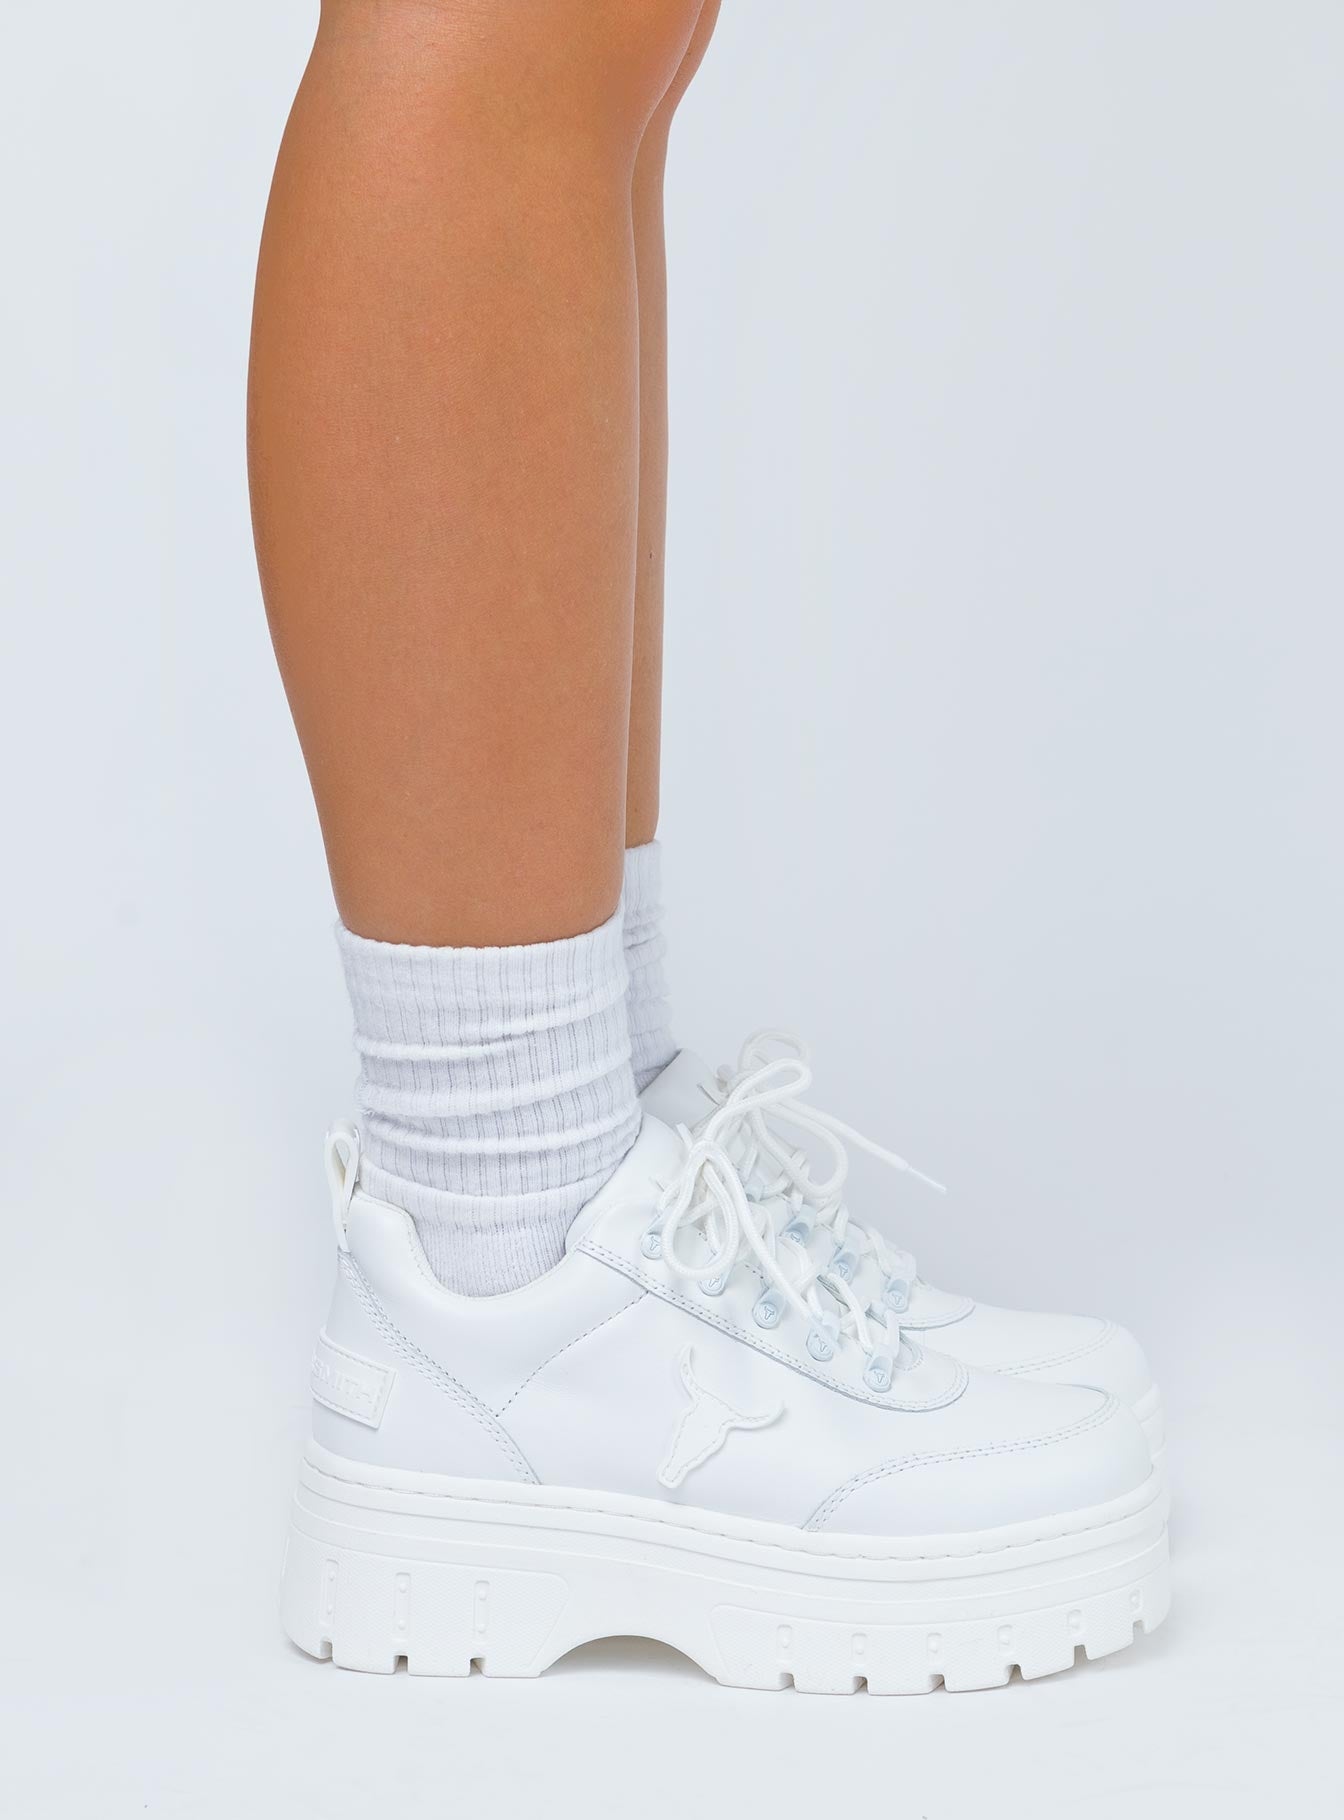 windsor smith lux sneakers